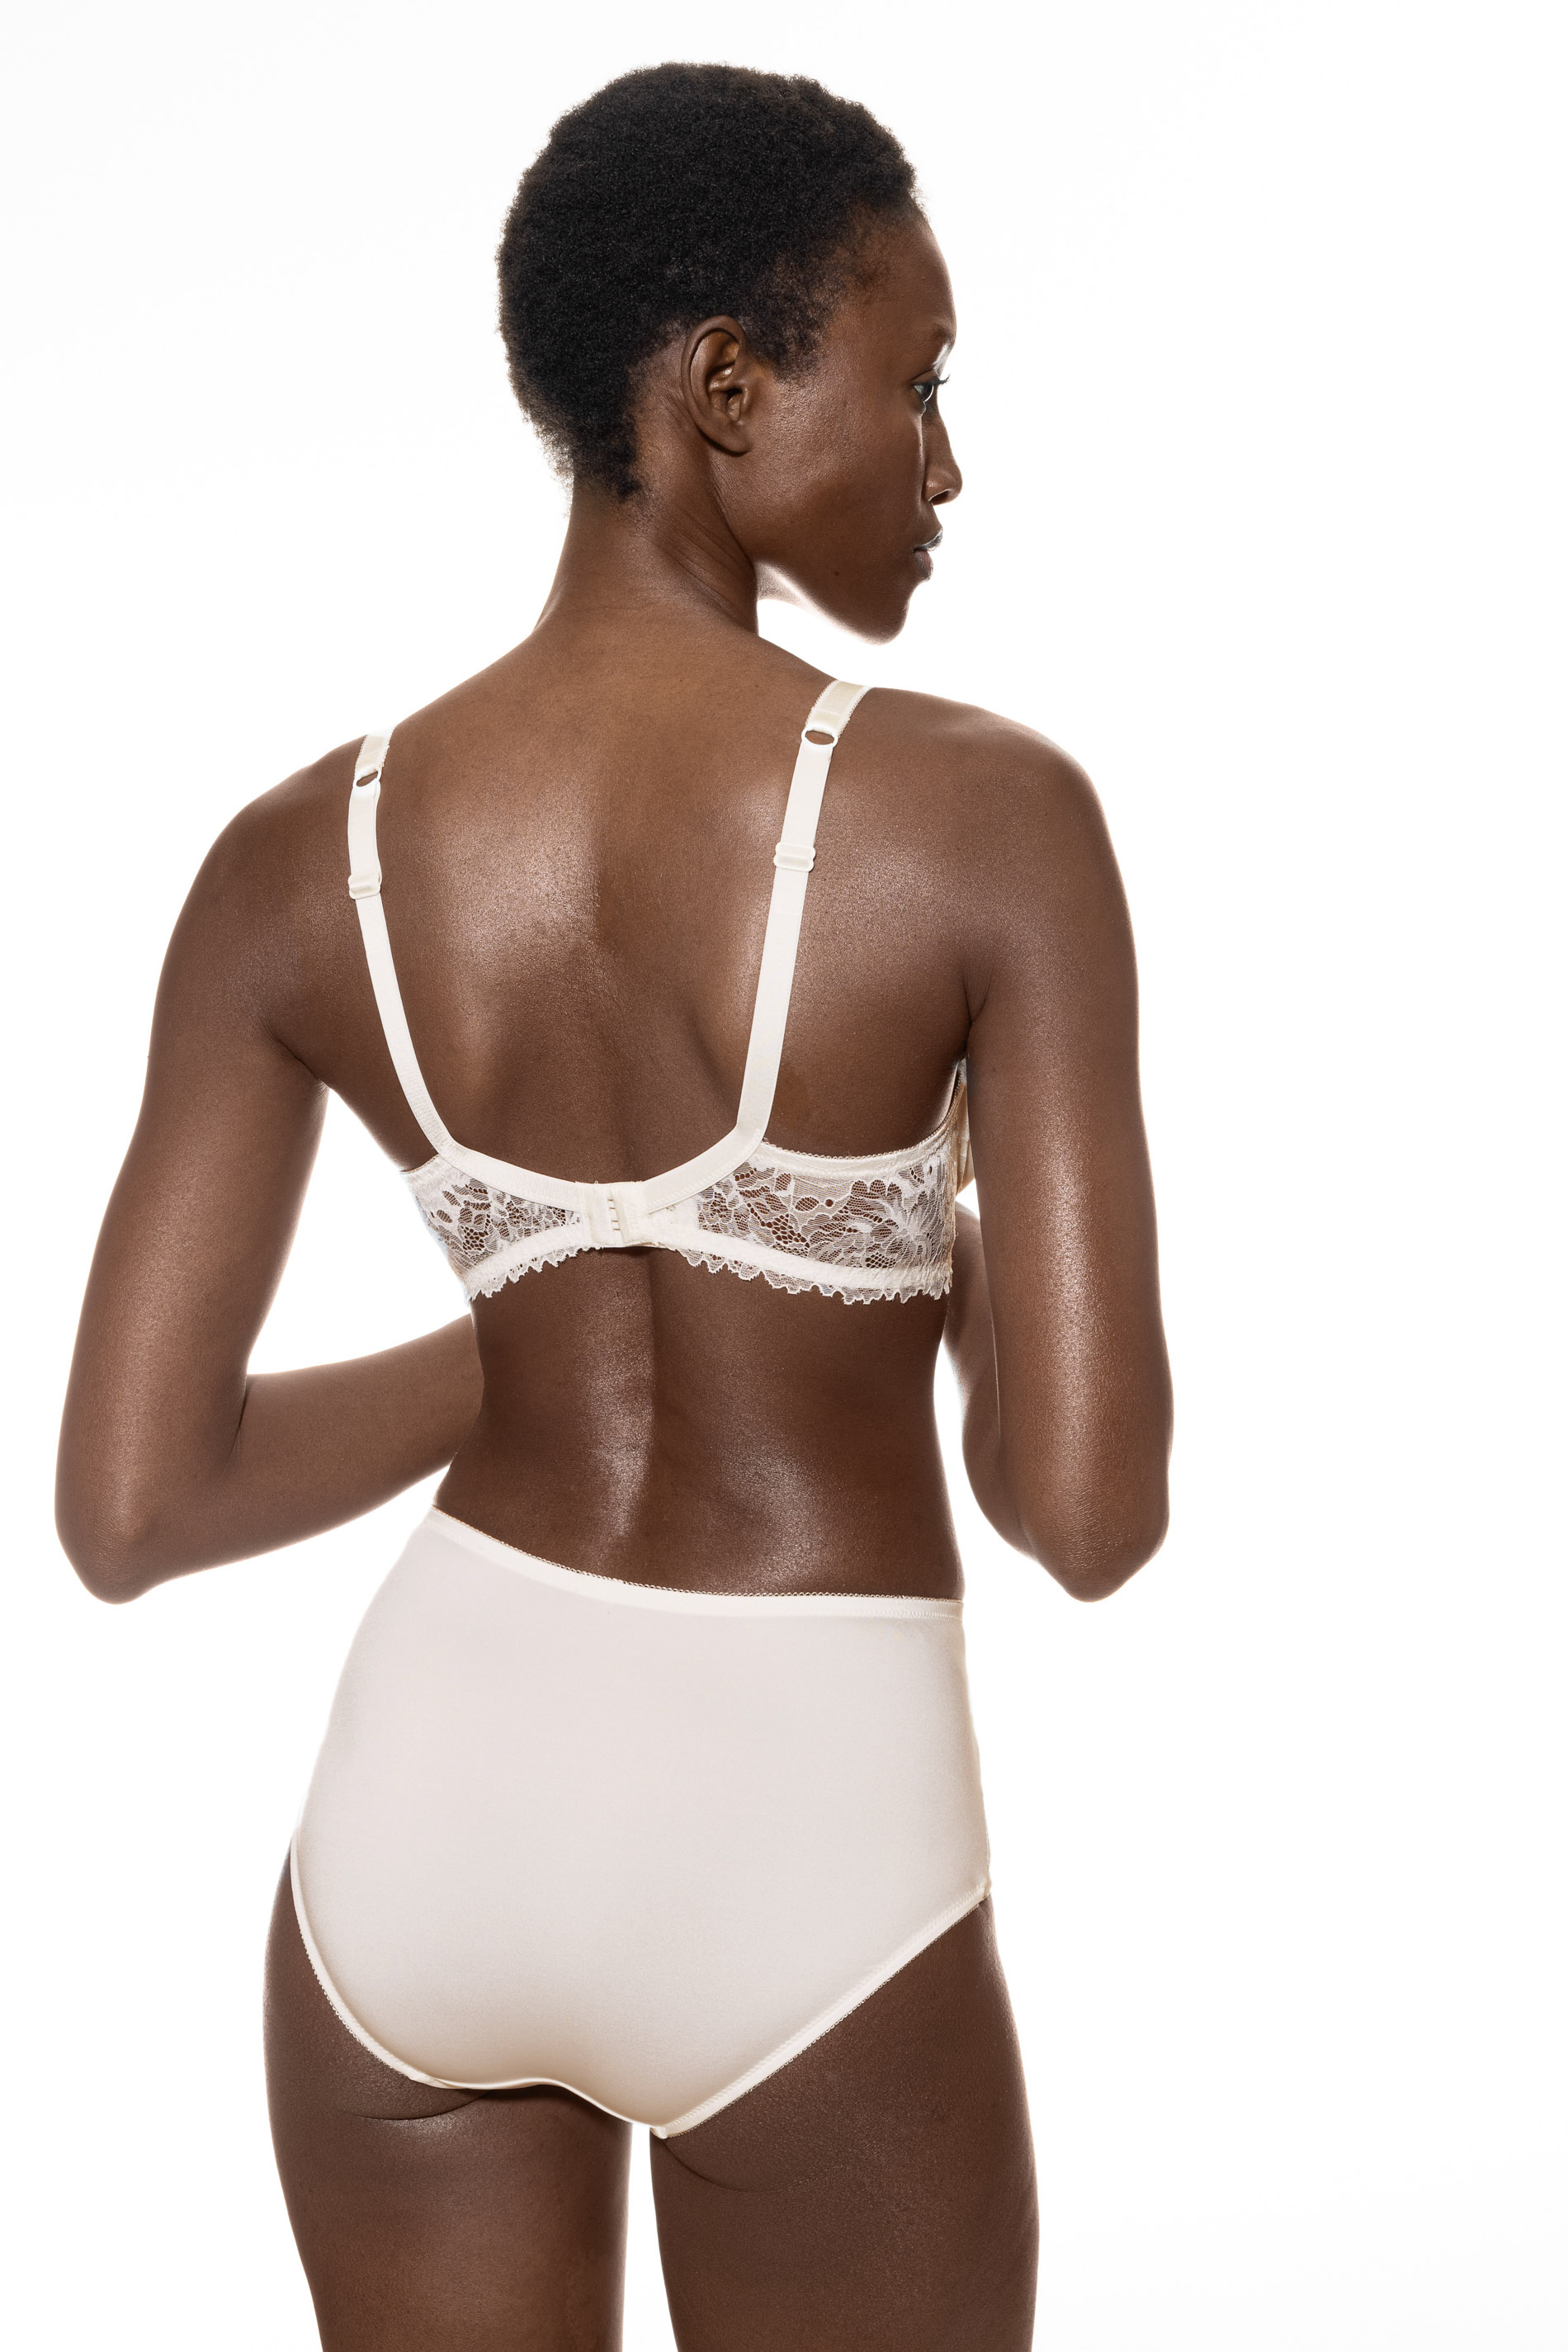 Spacer bra | Full Cup Champagner Serie Luxurious Rear View | mey®